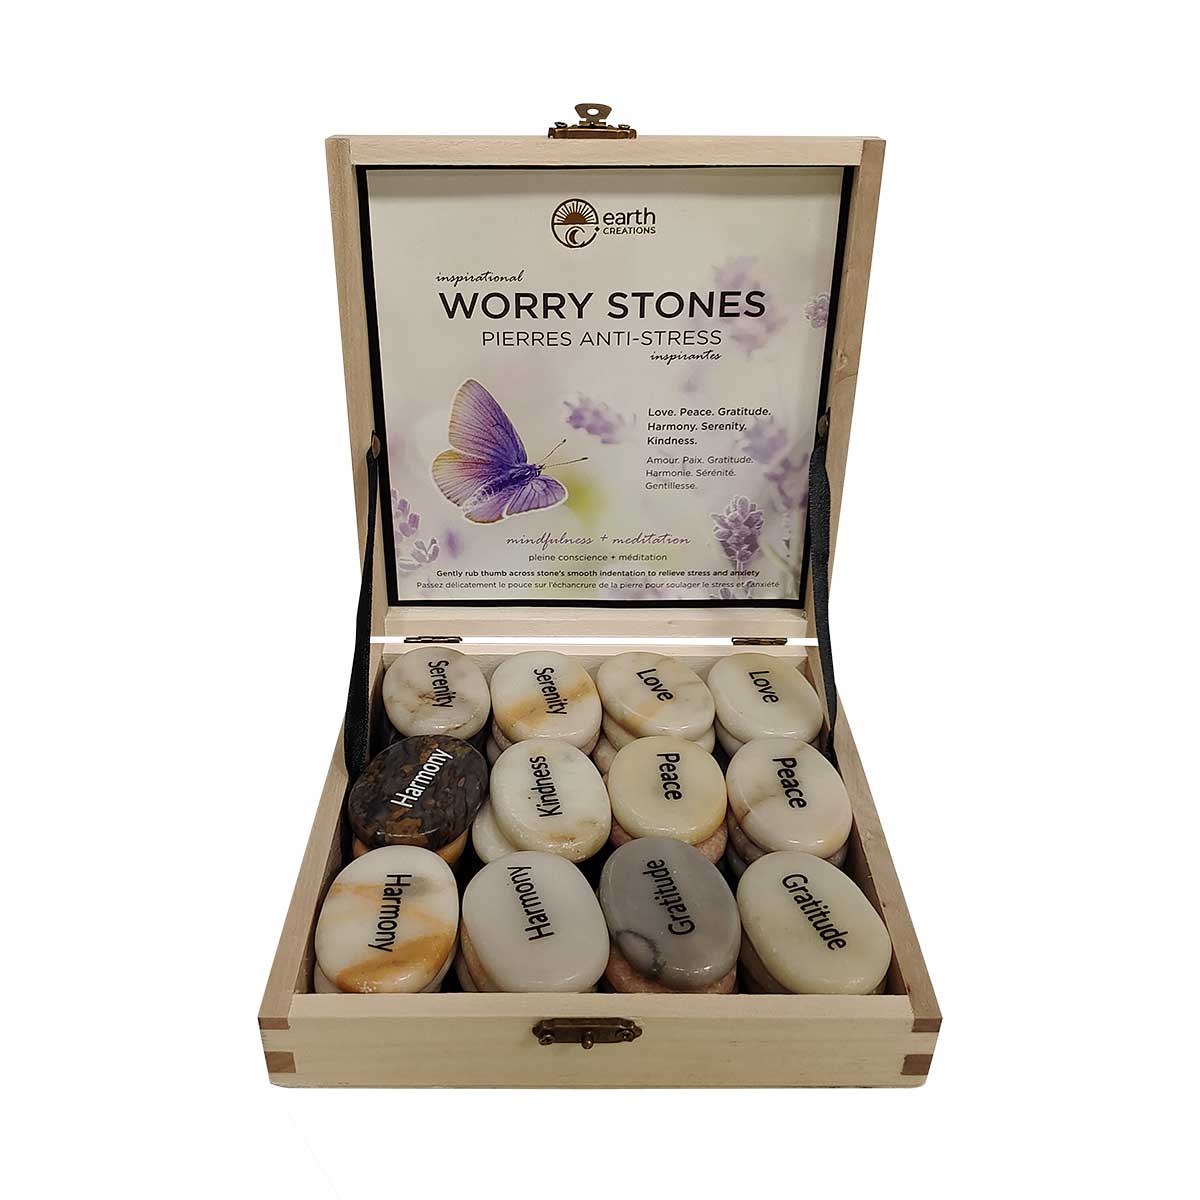 Wholesale Inspirational Worry Stones Displayer of 36